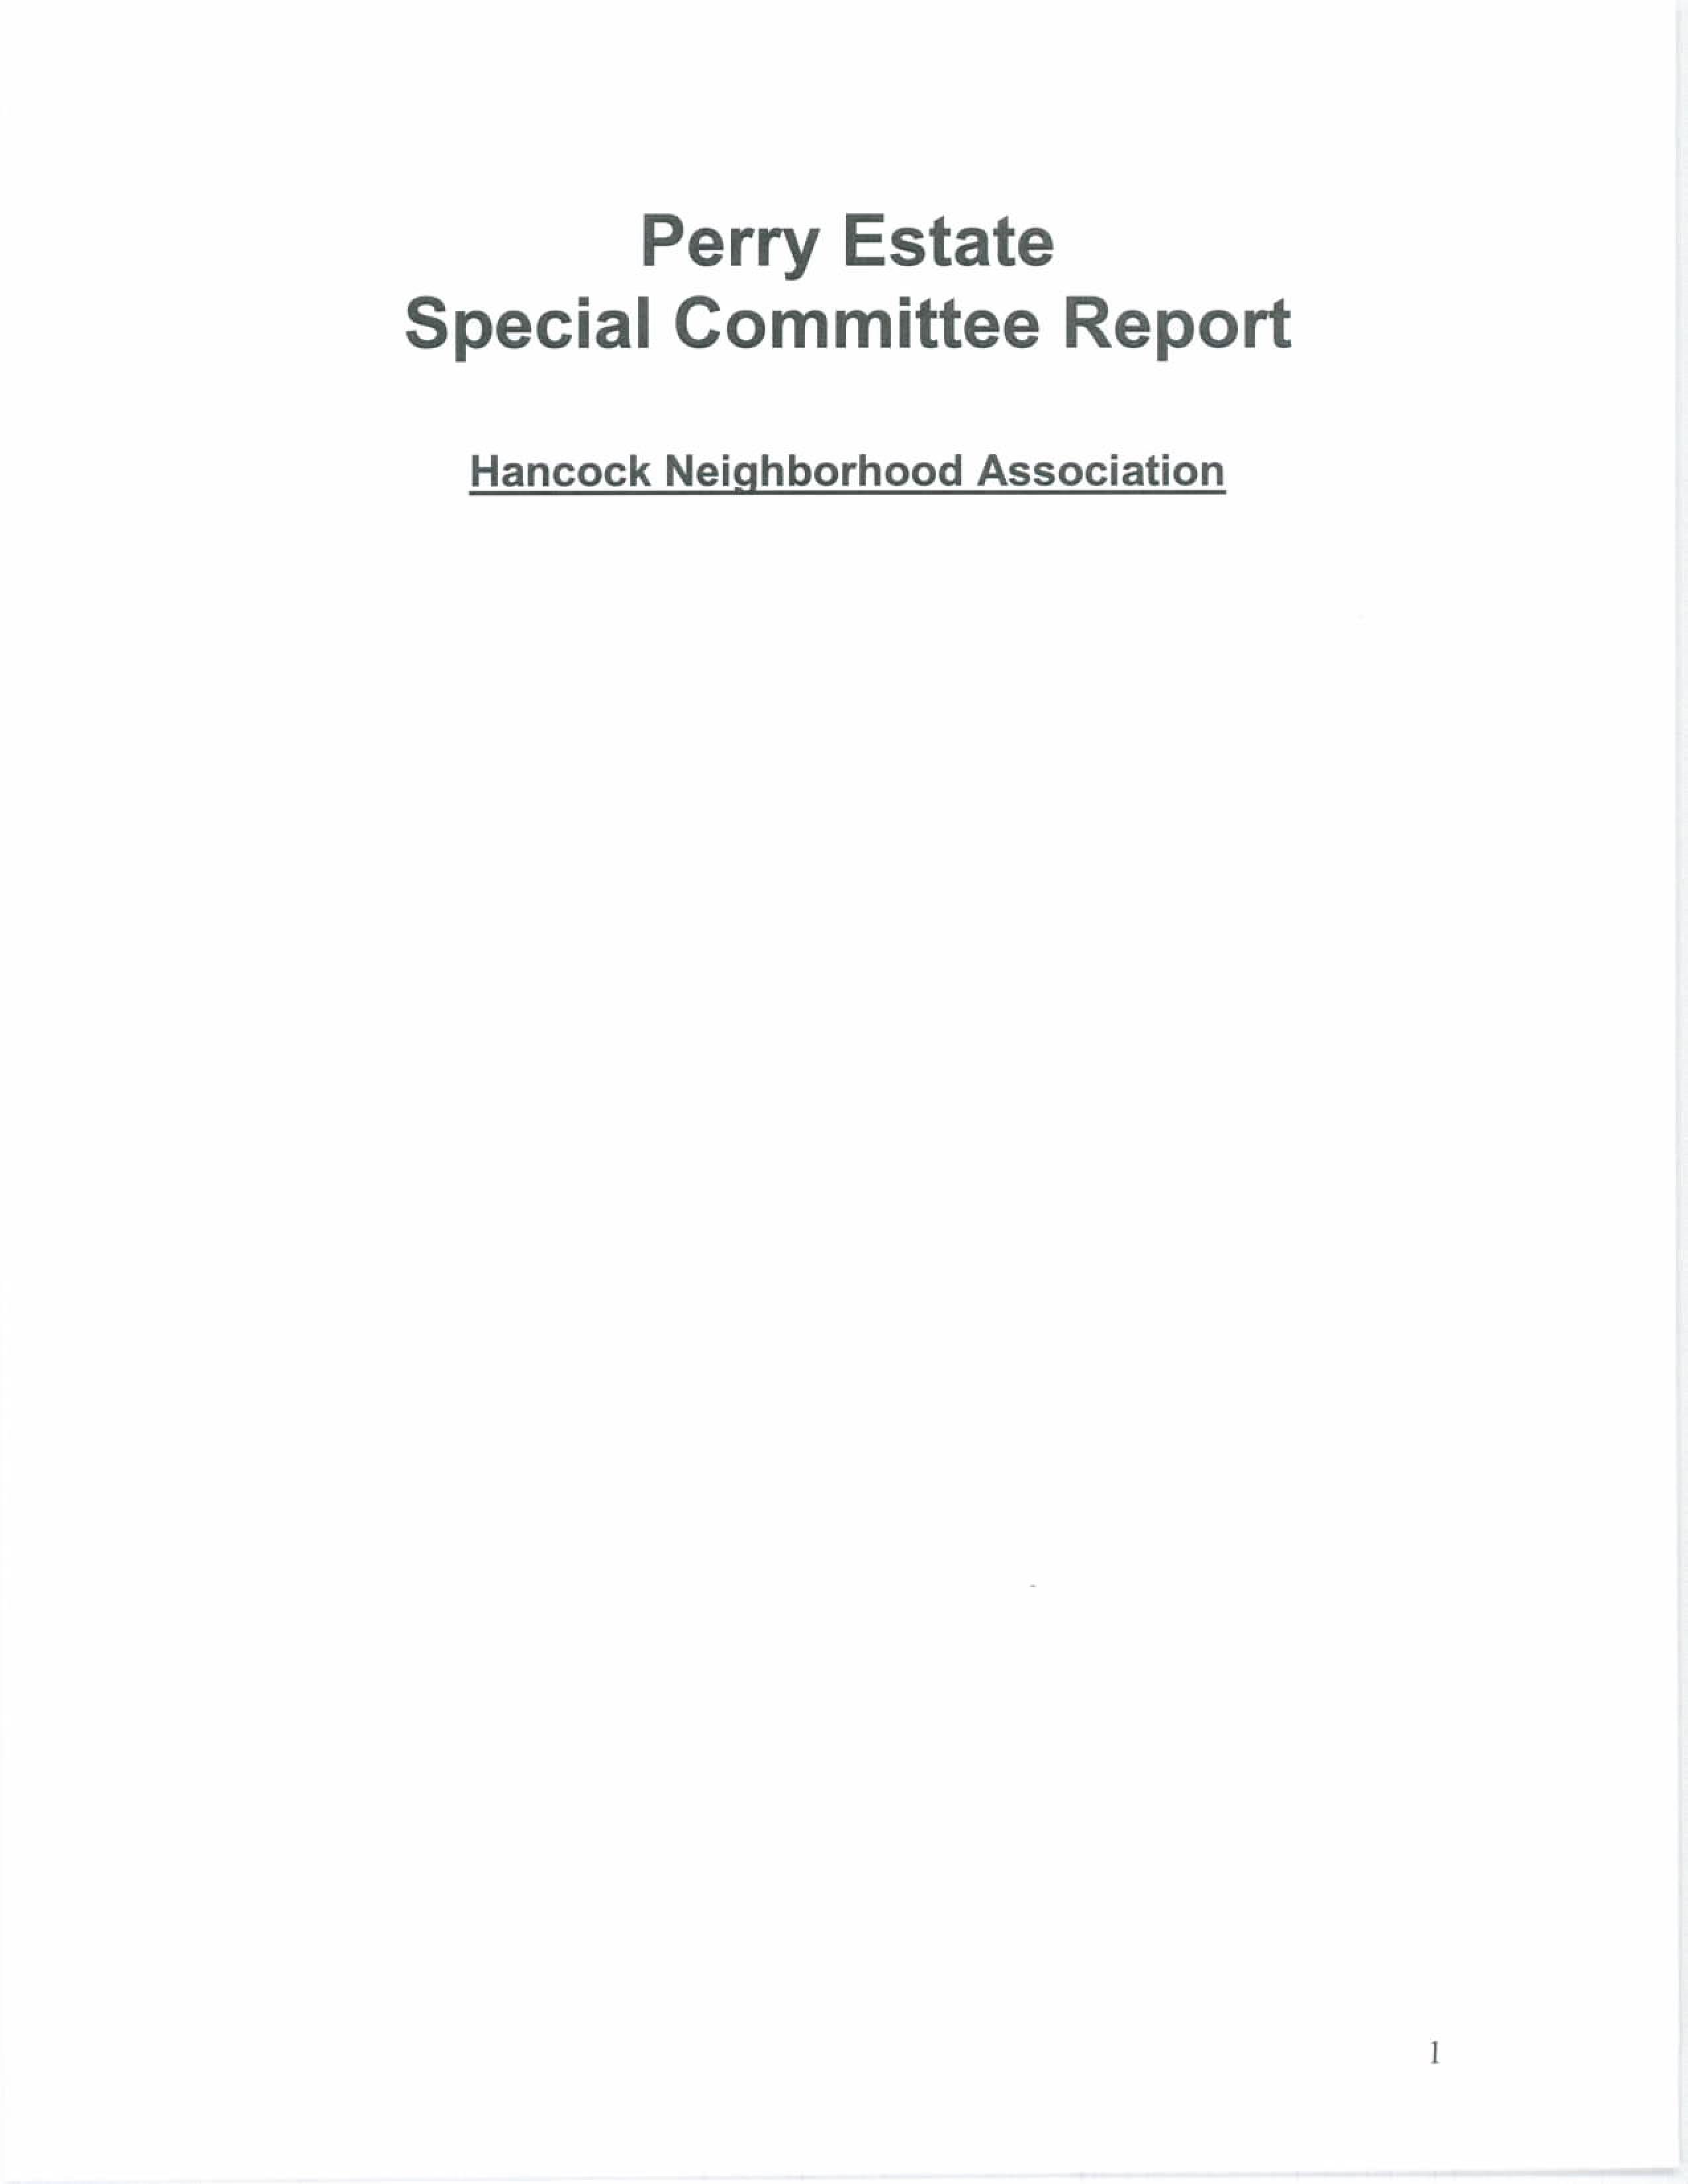 Special Committee Report for the Perry Estate